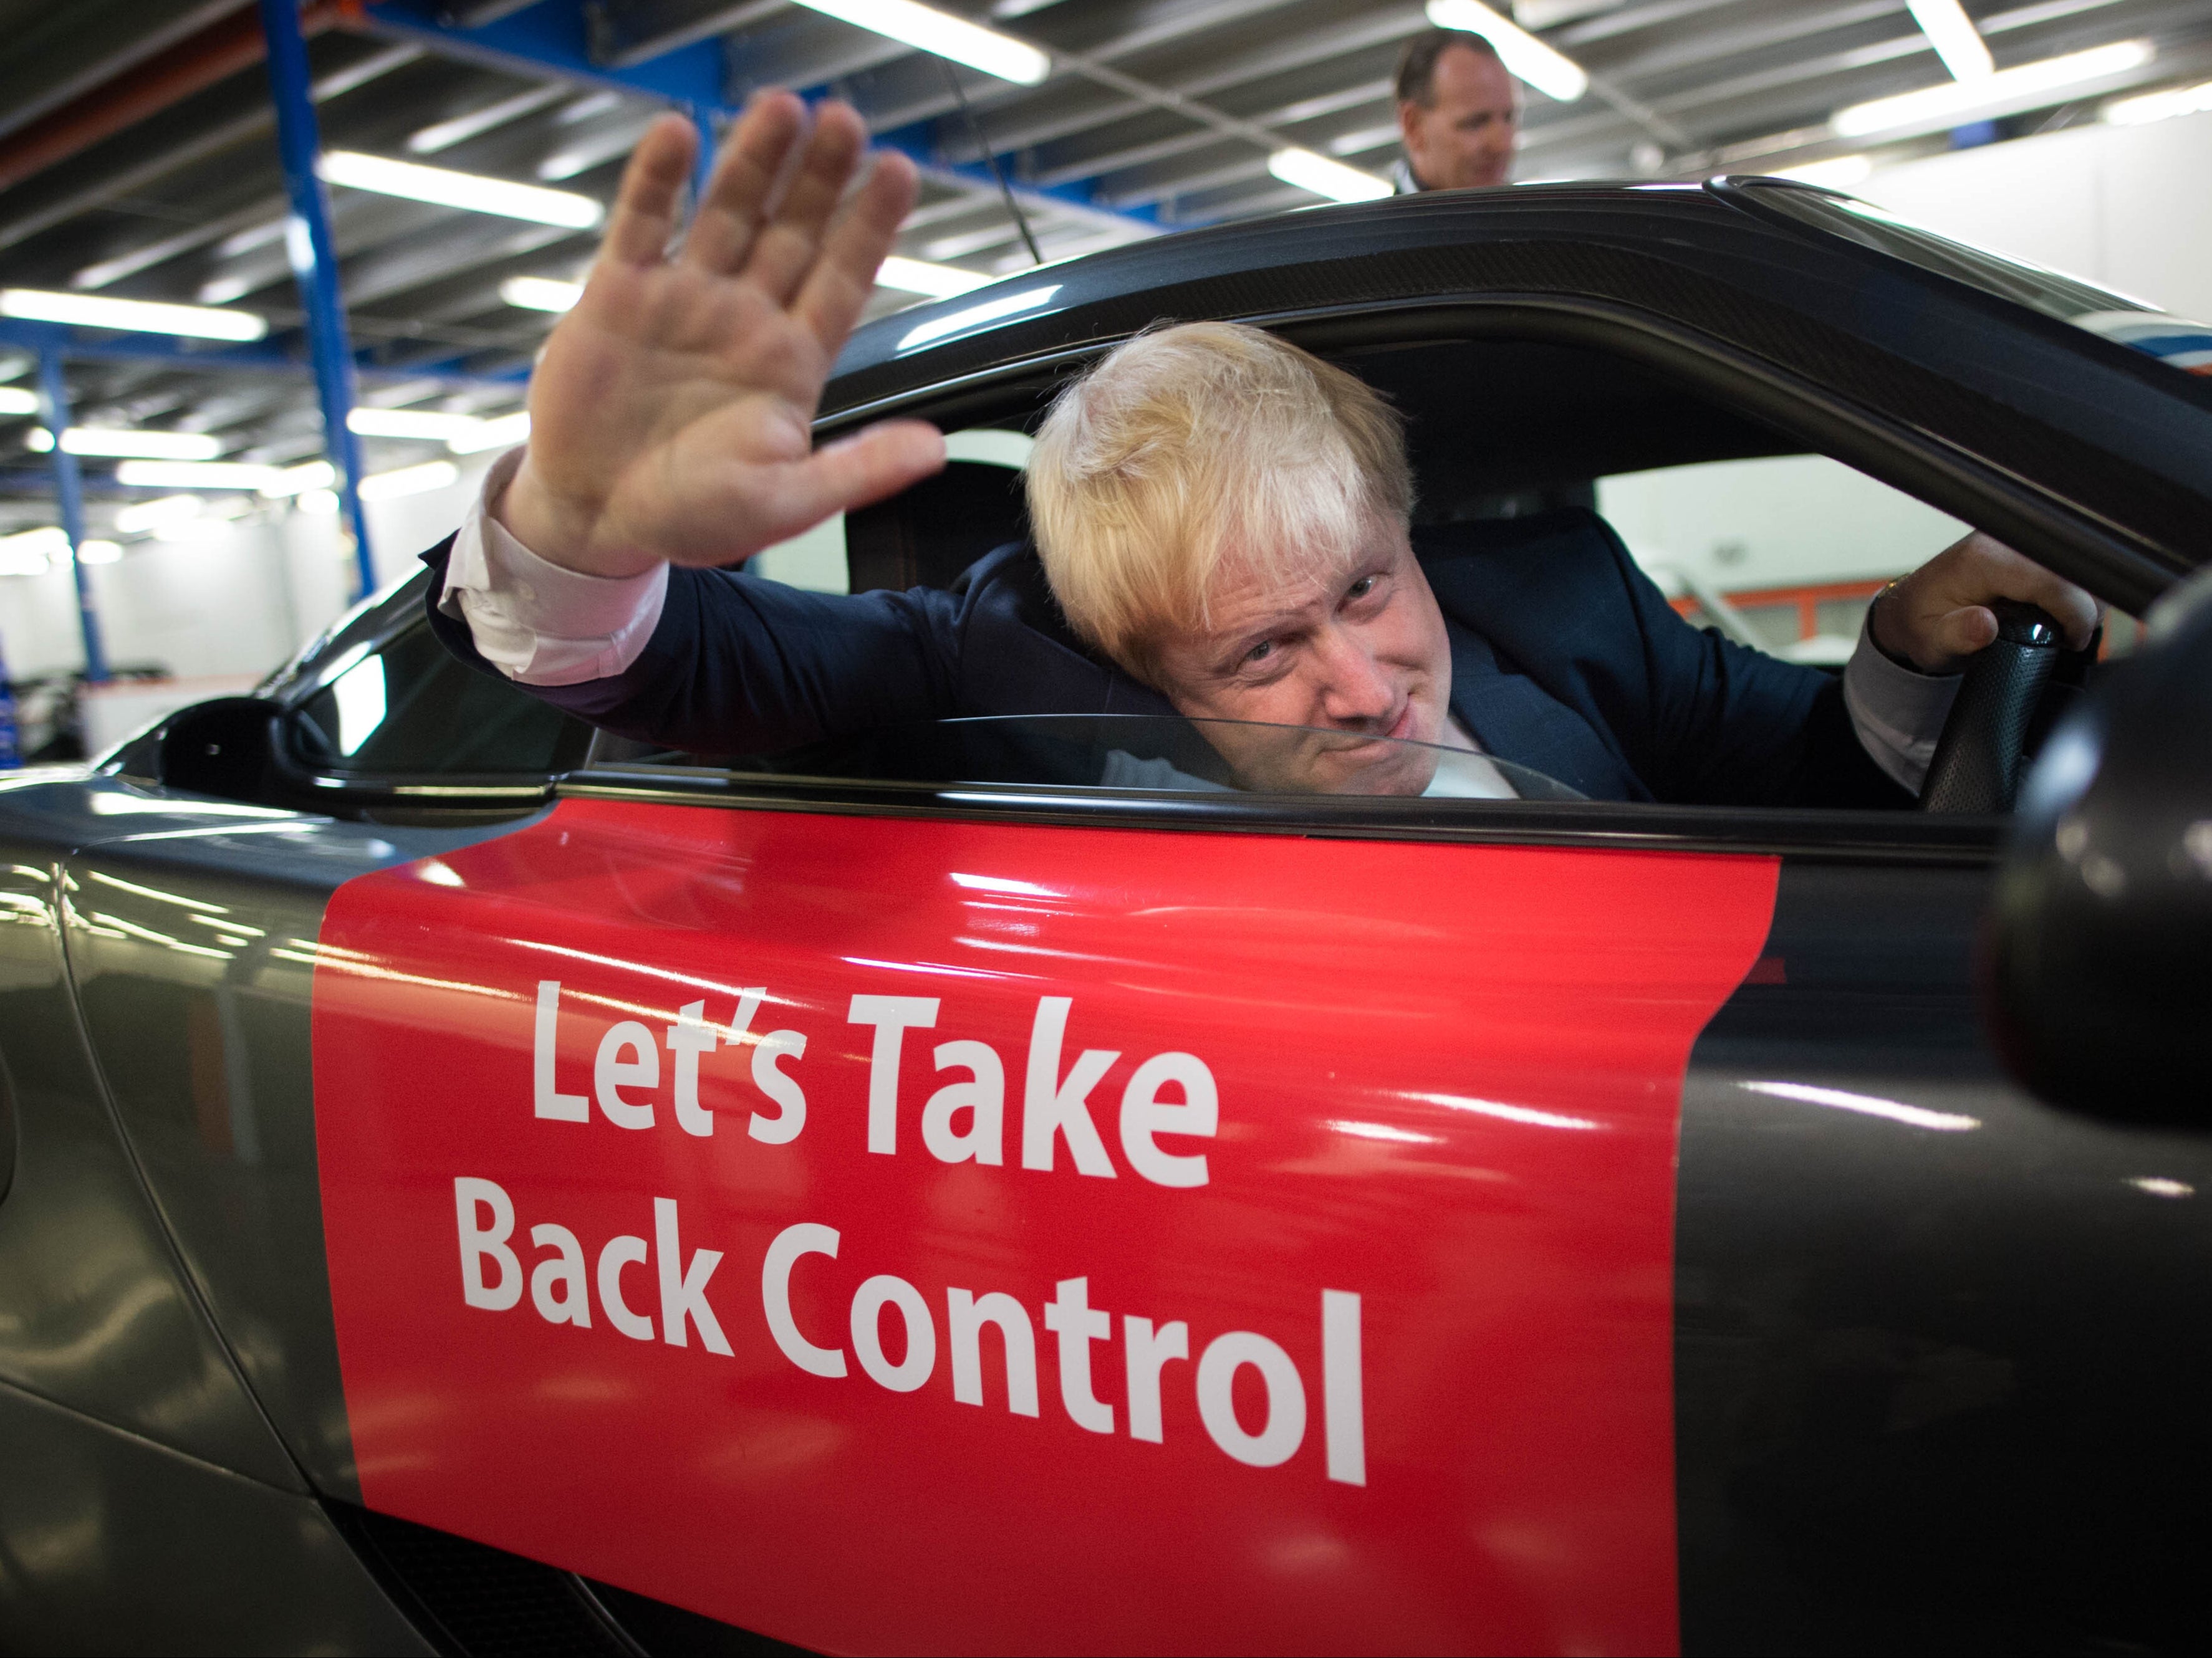 Boris Johnson: ‘This is a chance to get a great deal for Britain’